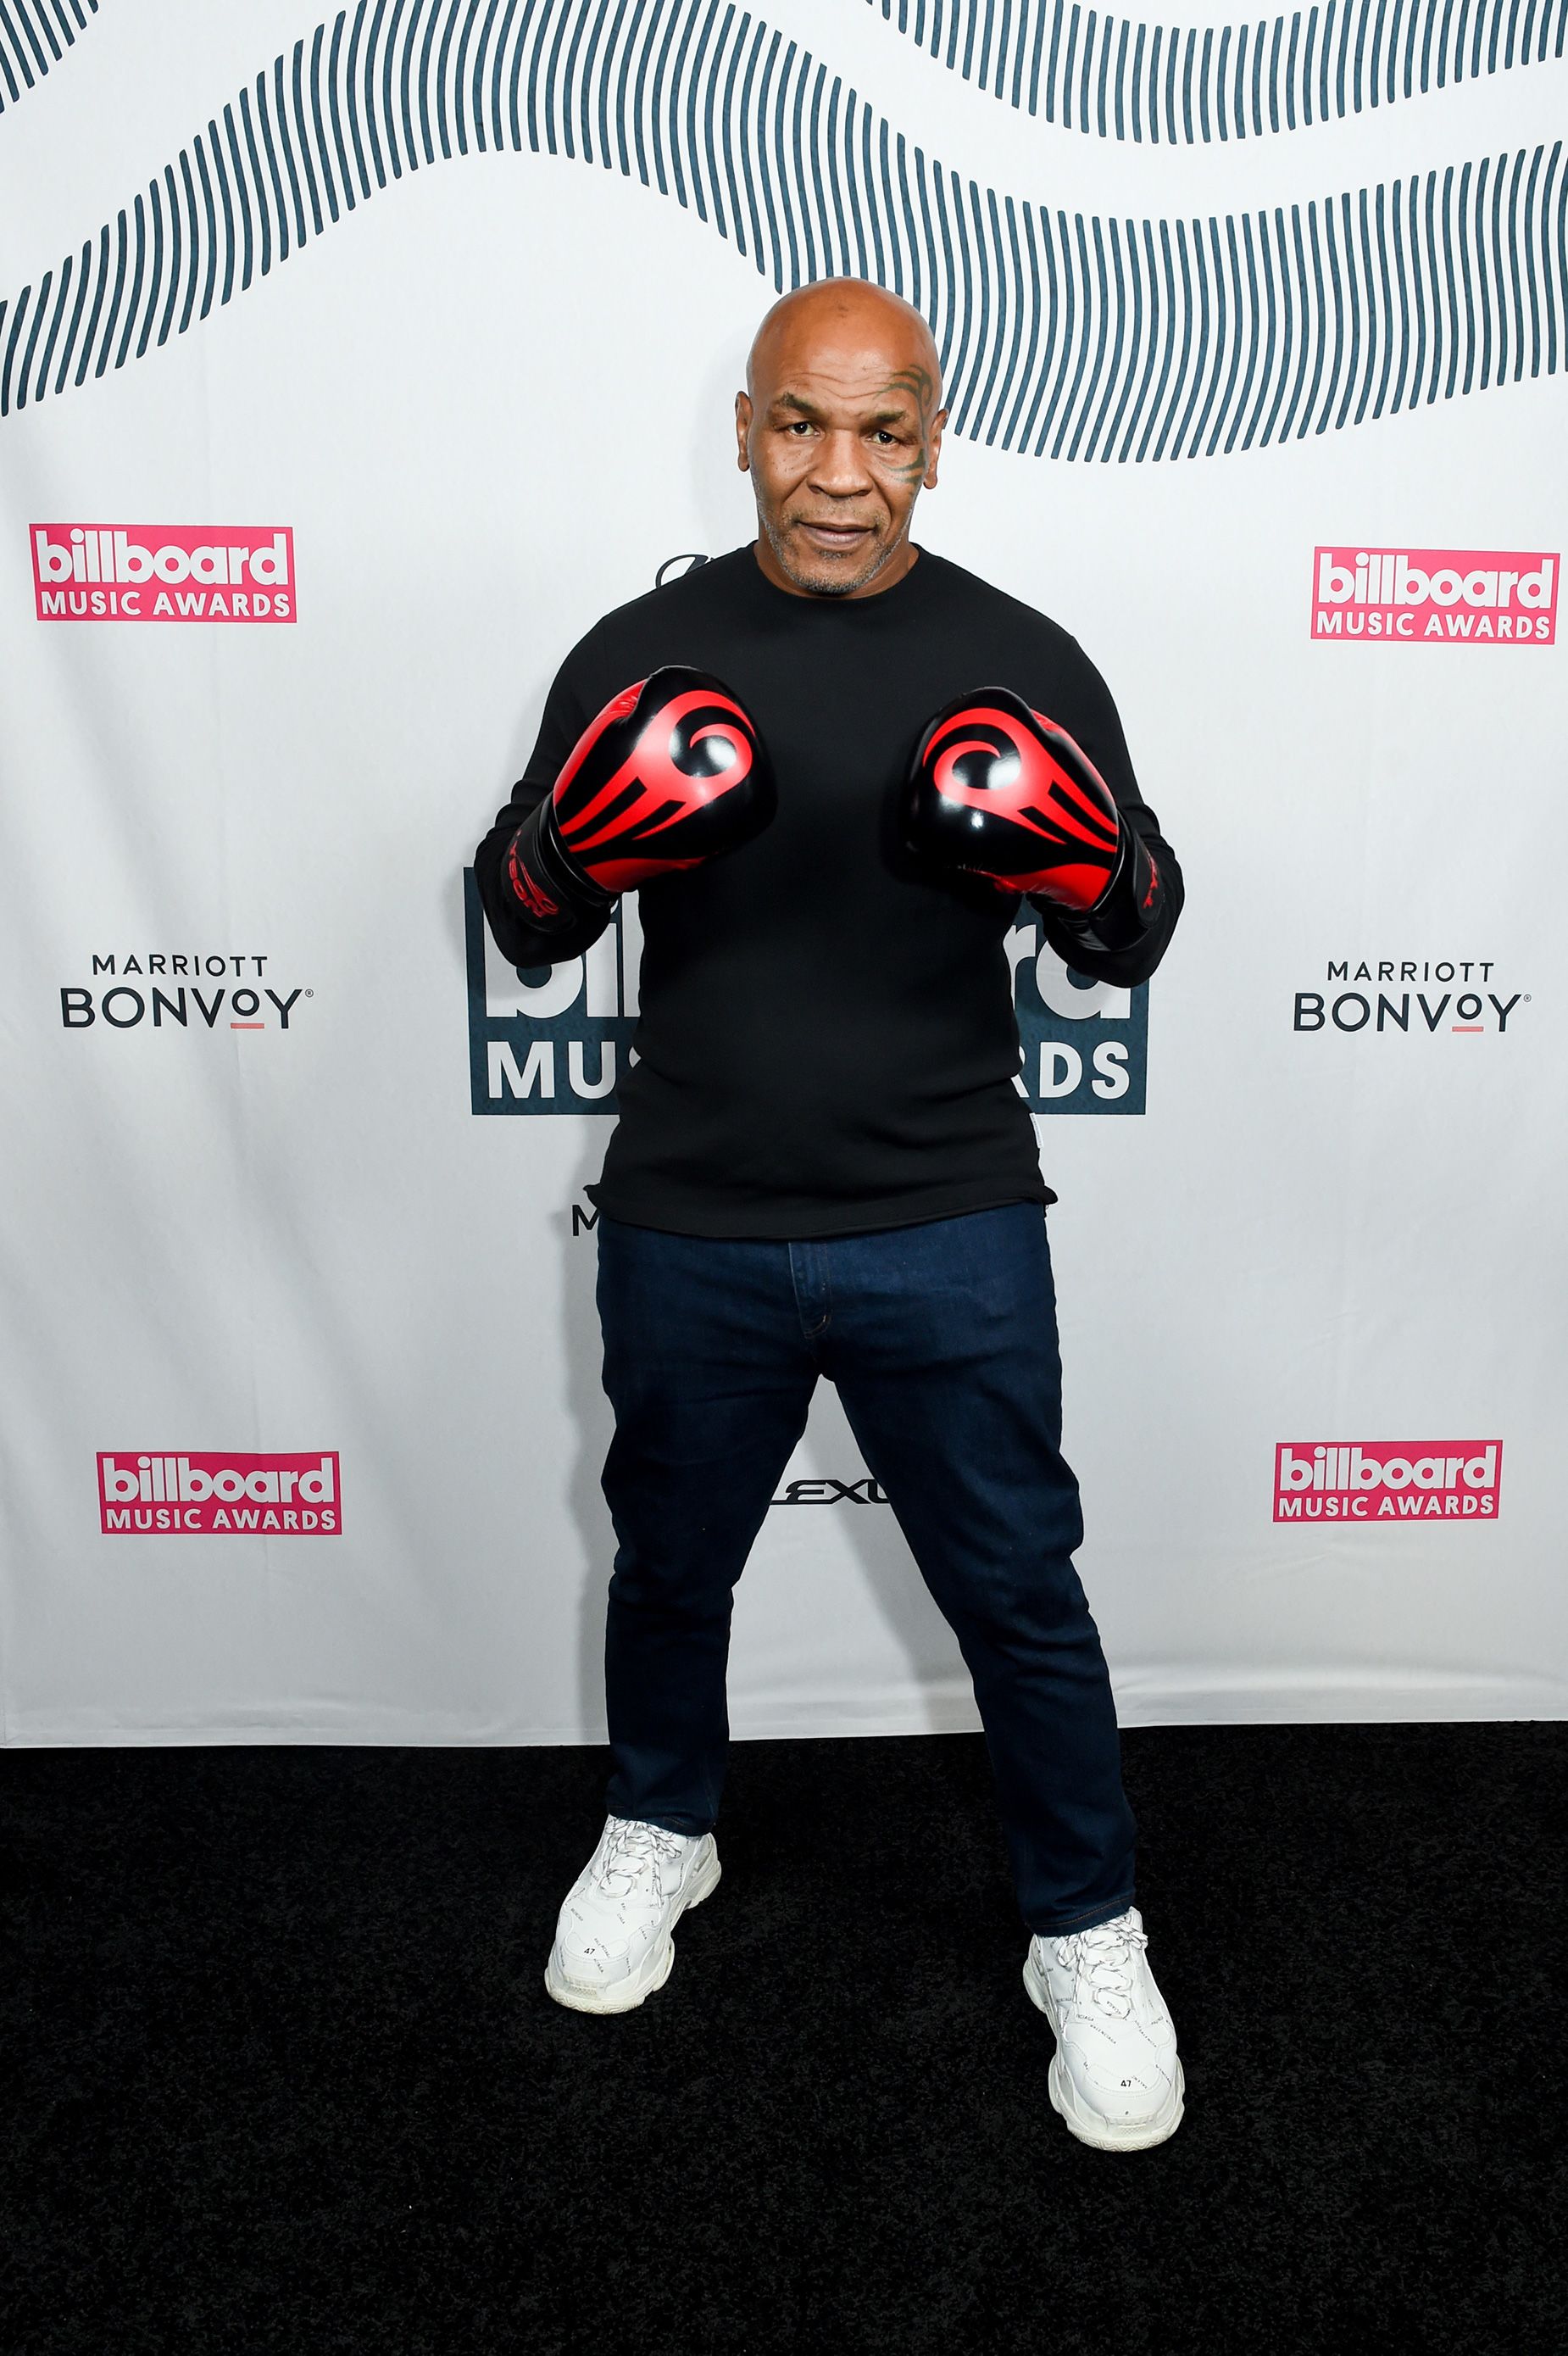 Knockout! Boxer Mike Tyson accessorized his casual look with a pair of red and black boxing gloves from his own line.